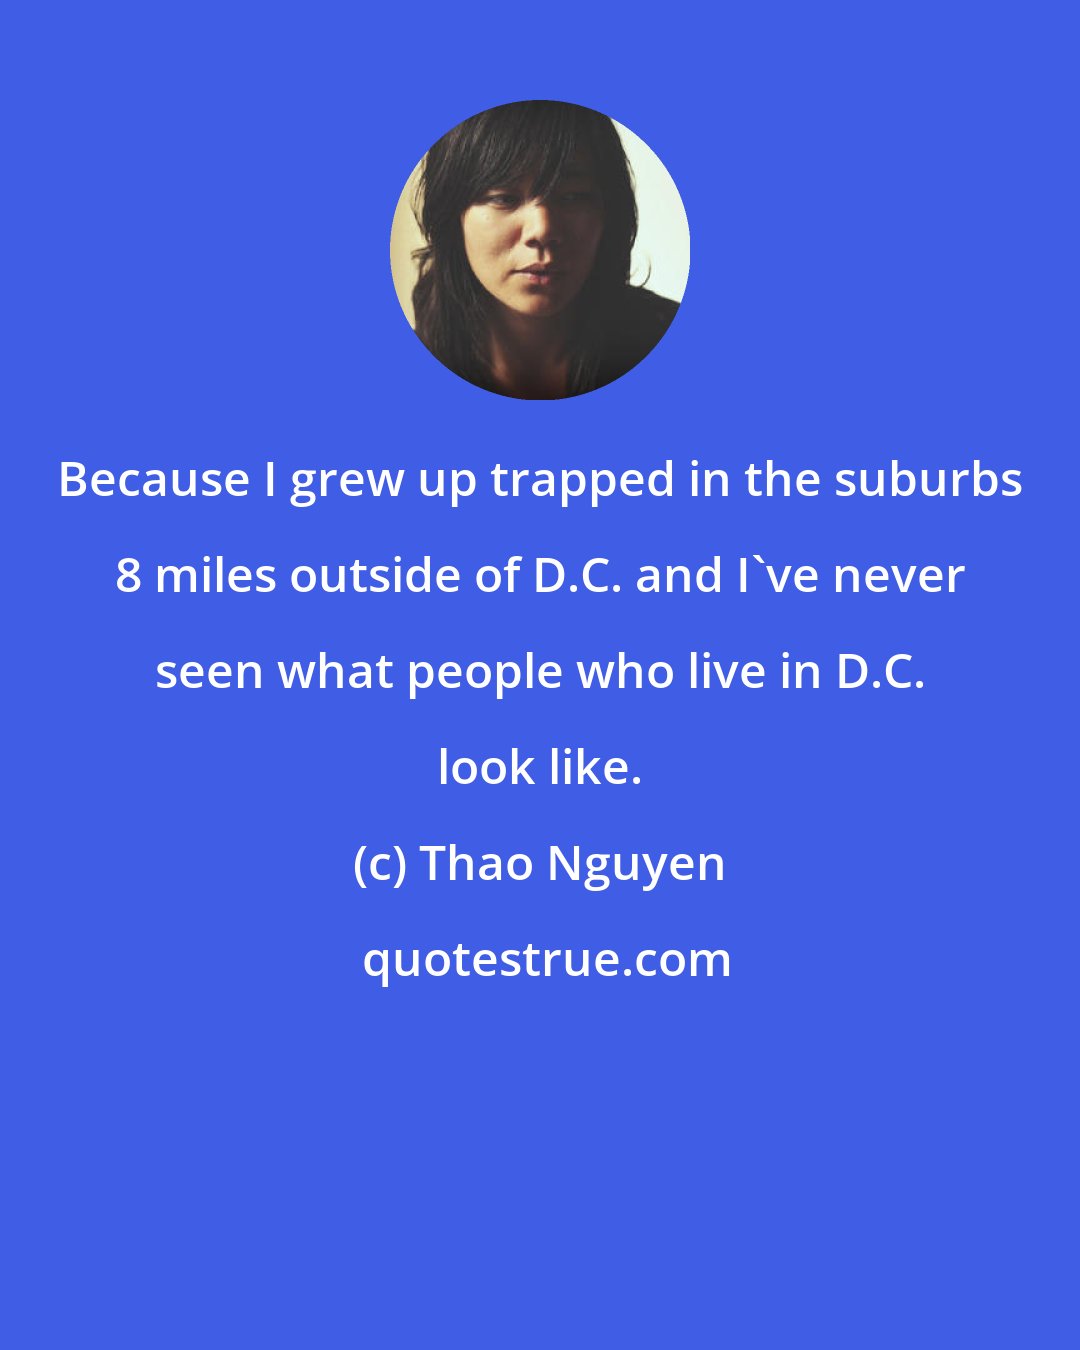 Thao Nguyen: Because I grew up trapped in the suburbs 8 miles outside of D.C. and I've never seen what people who live in D.C. look like.